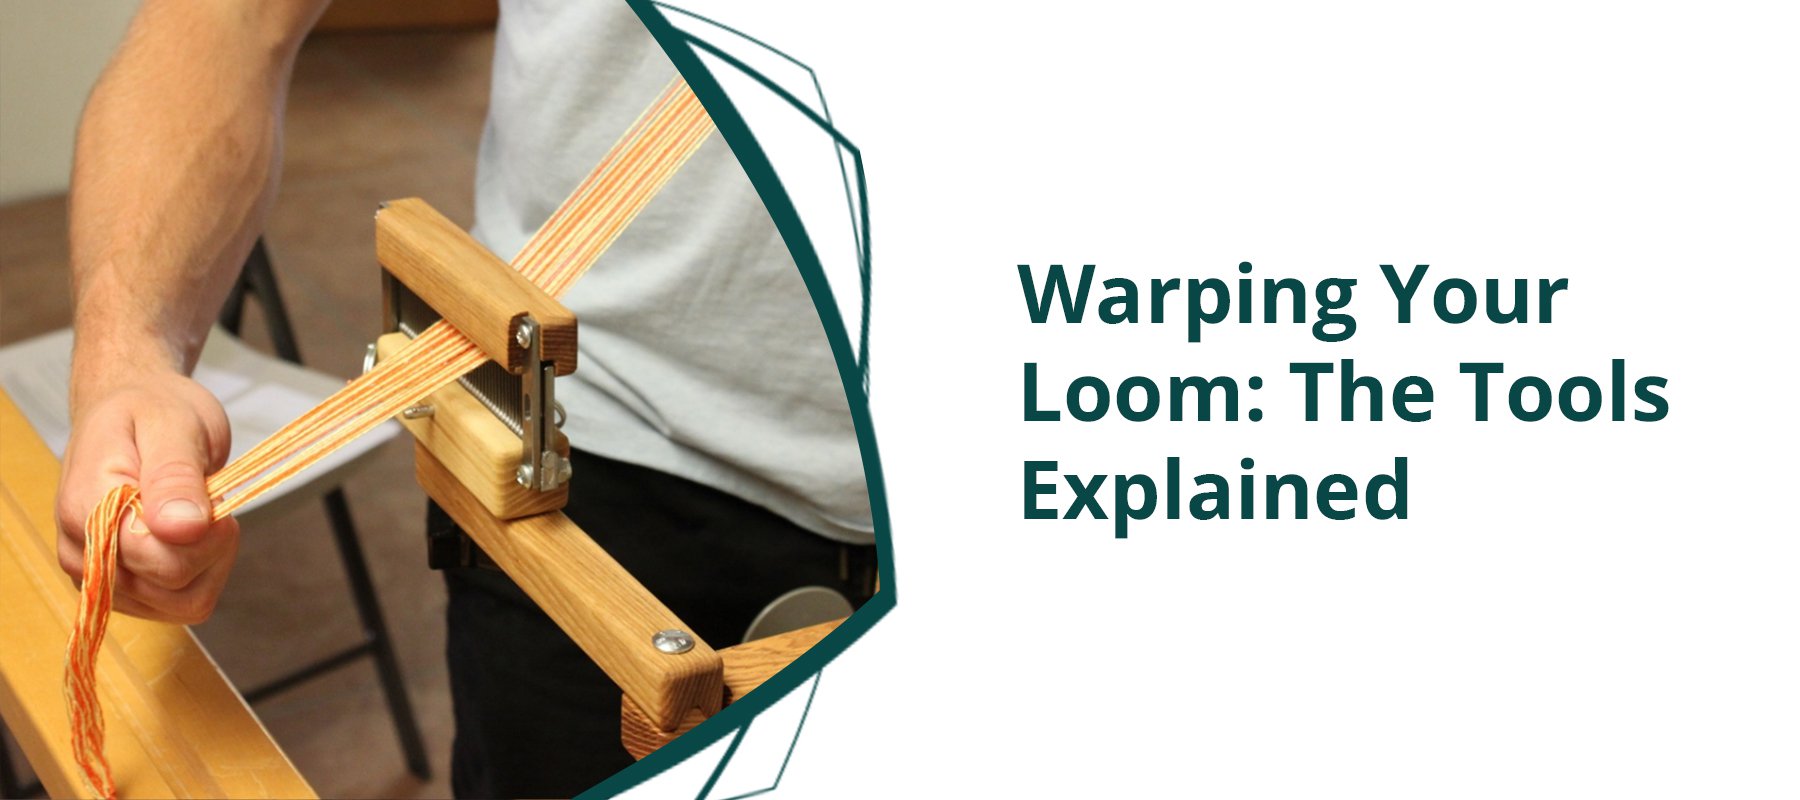 Warping Your Loom: The Different Tools Explained